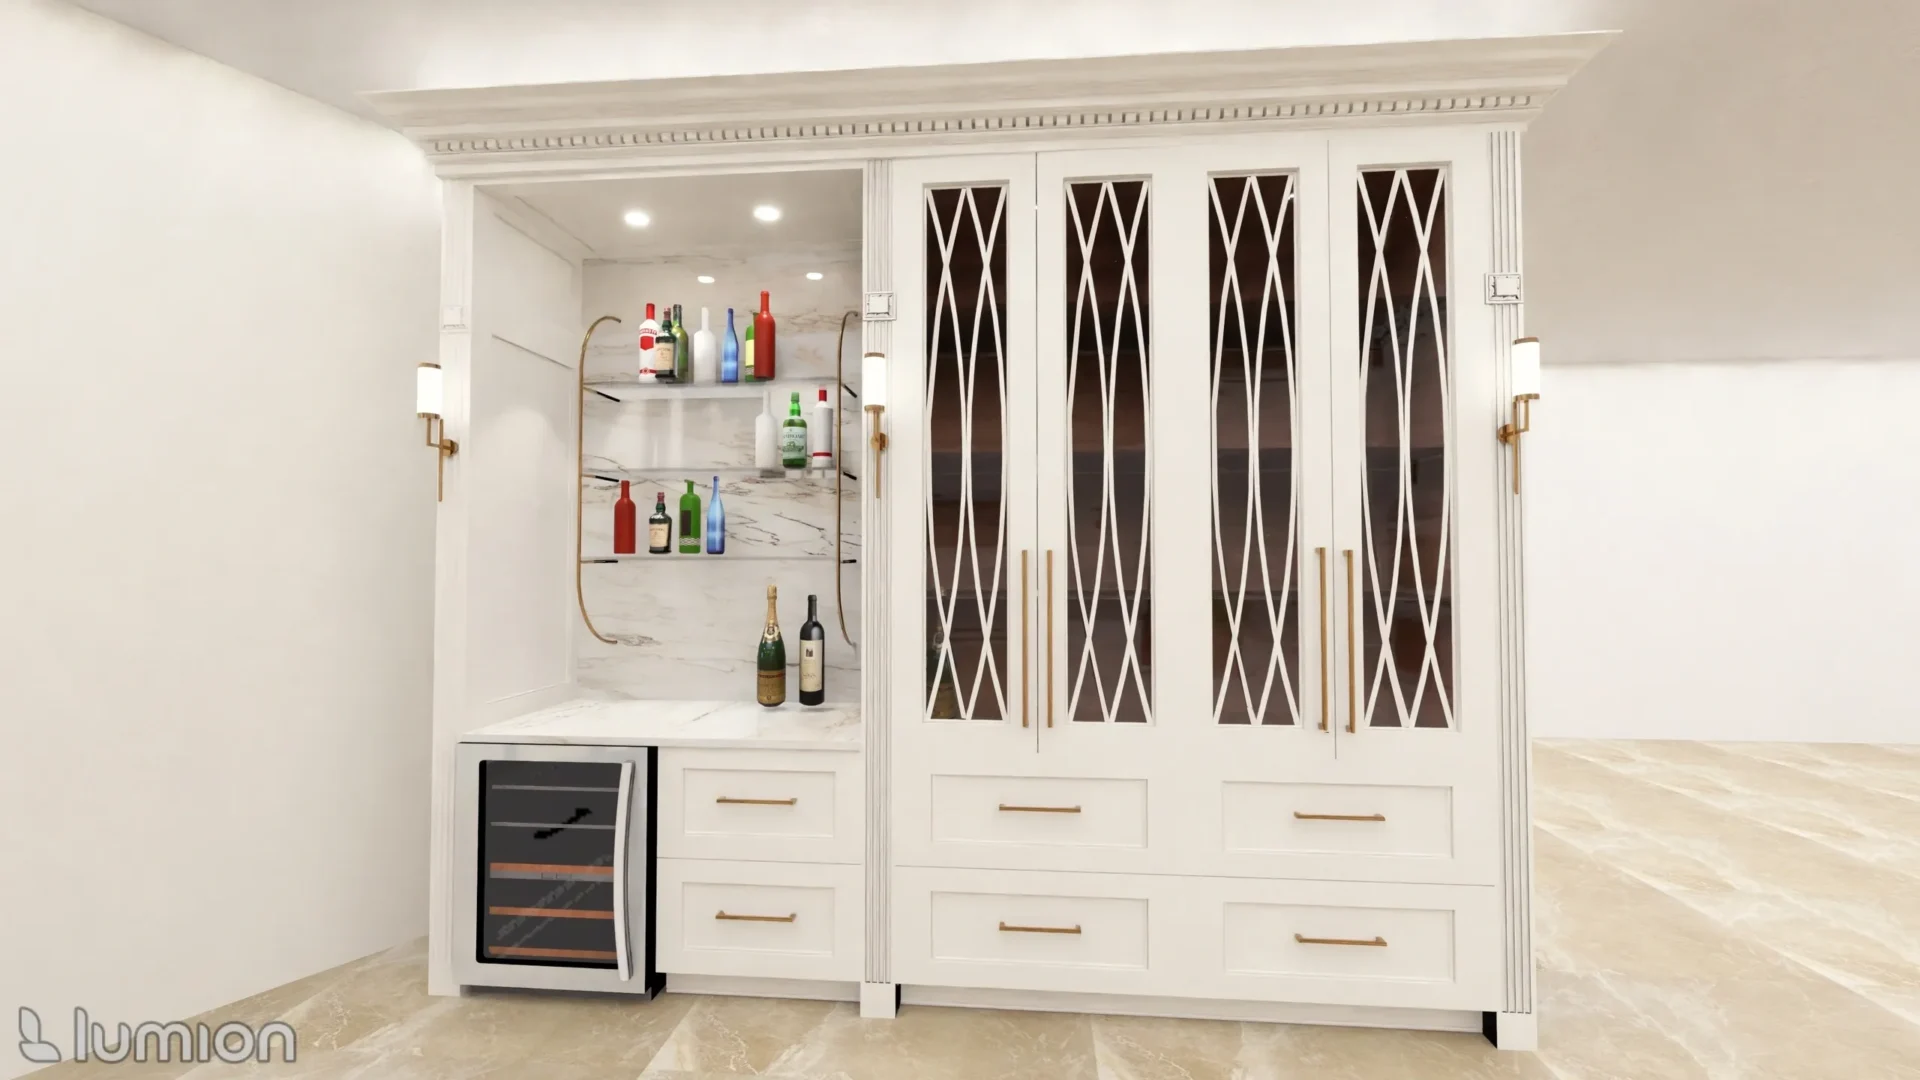 A wine cooler and cabinets in the kitchen